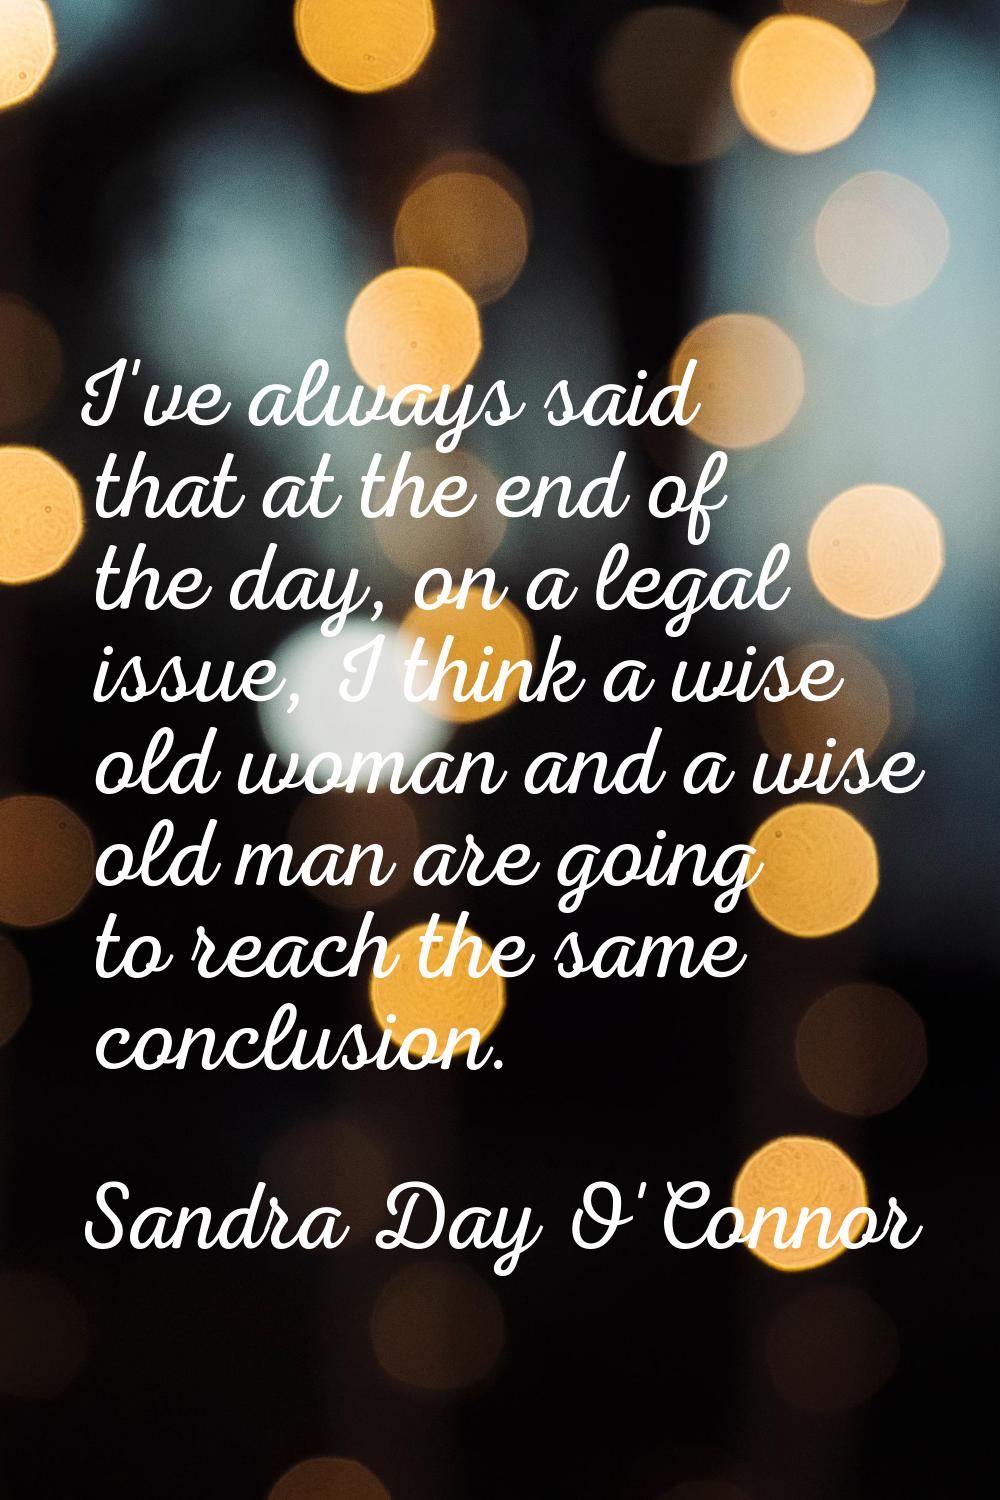 I've always said that at the end of the day, on a legal issue, I think a wise old woman and a wise 